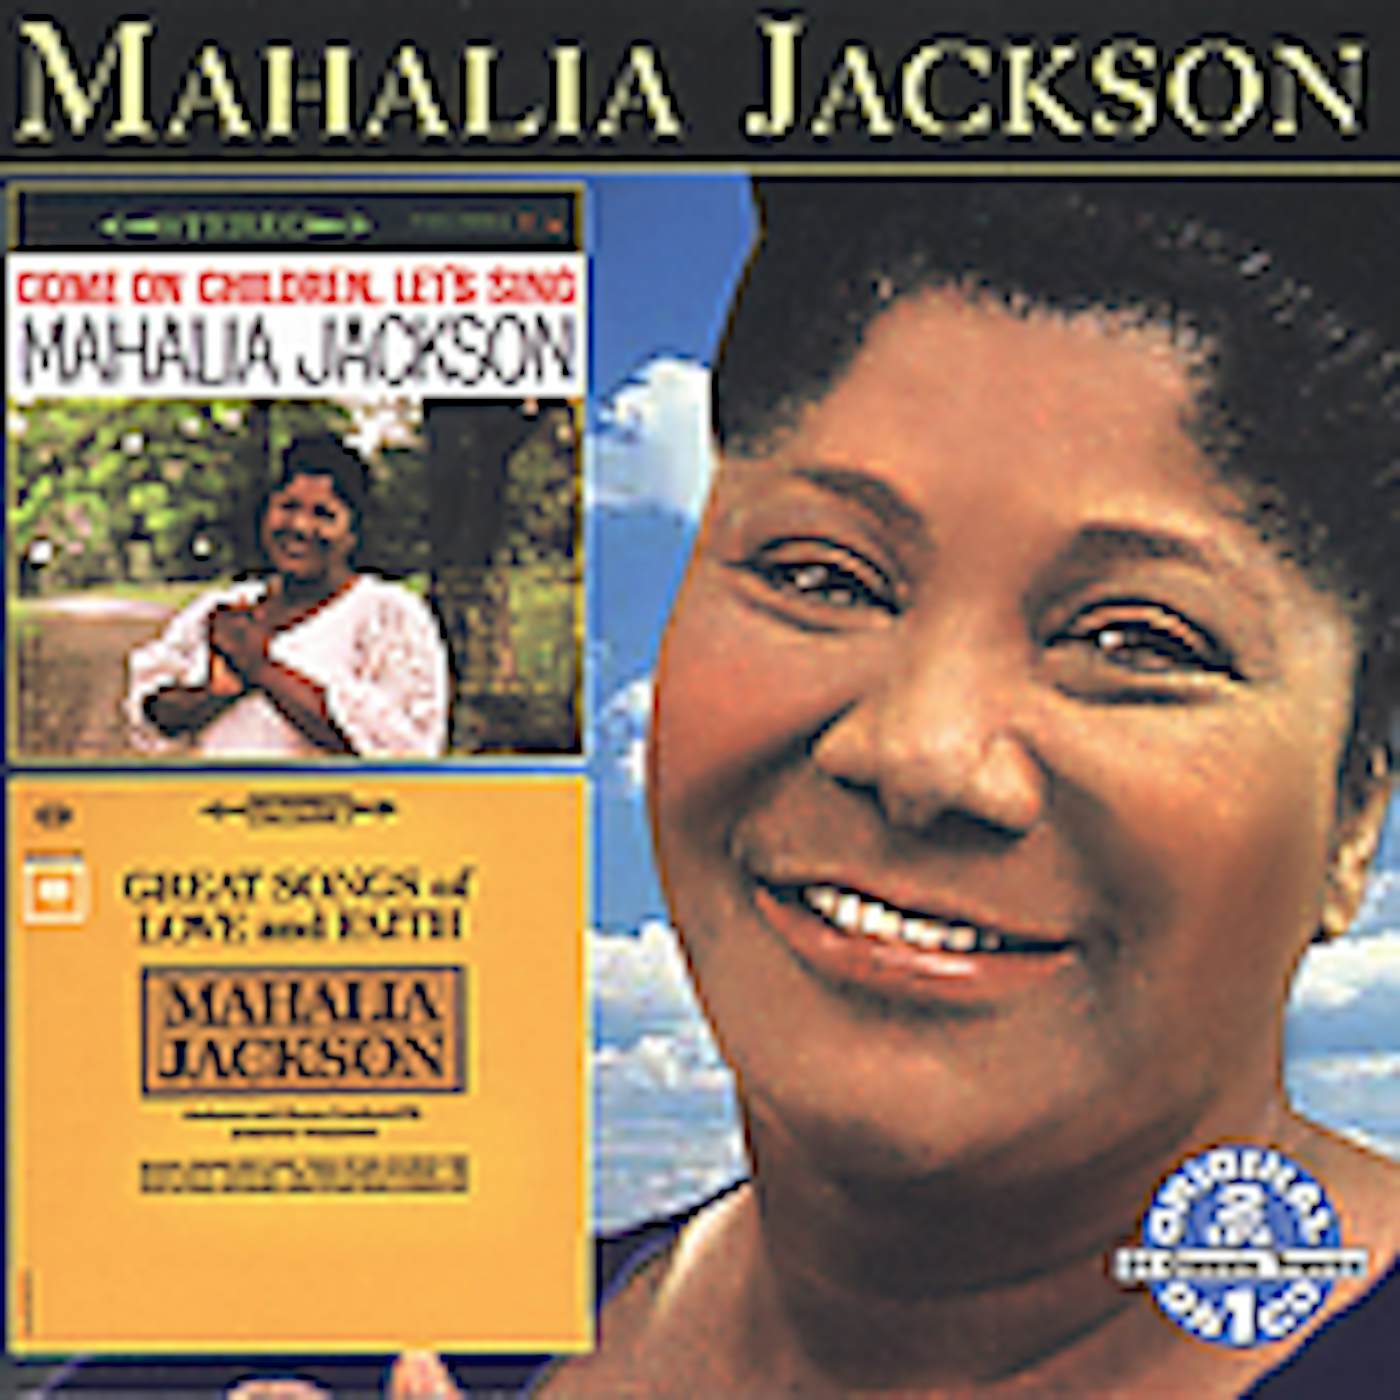 Mahalia Jackson COME ON CHILDREN LET'S SING: GREAT SONGS OF LOVE & CD